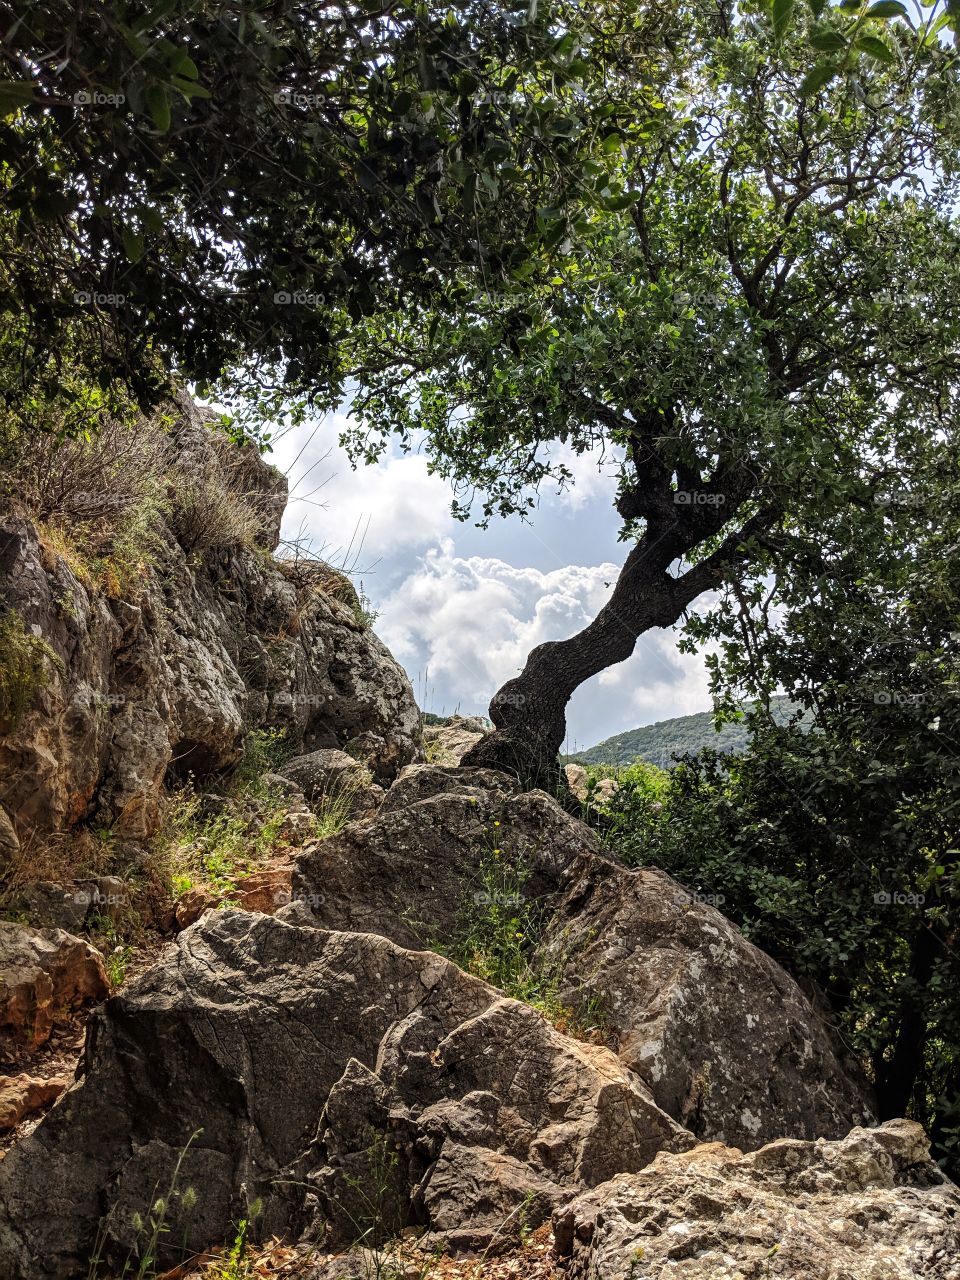 Amazing view of a tree in top of a rock